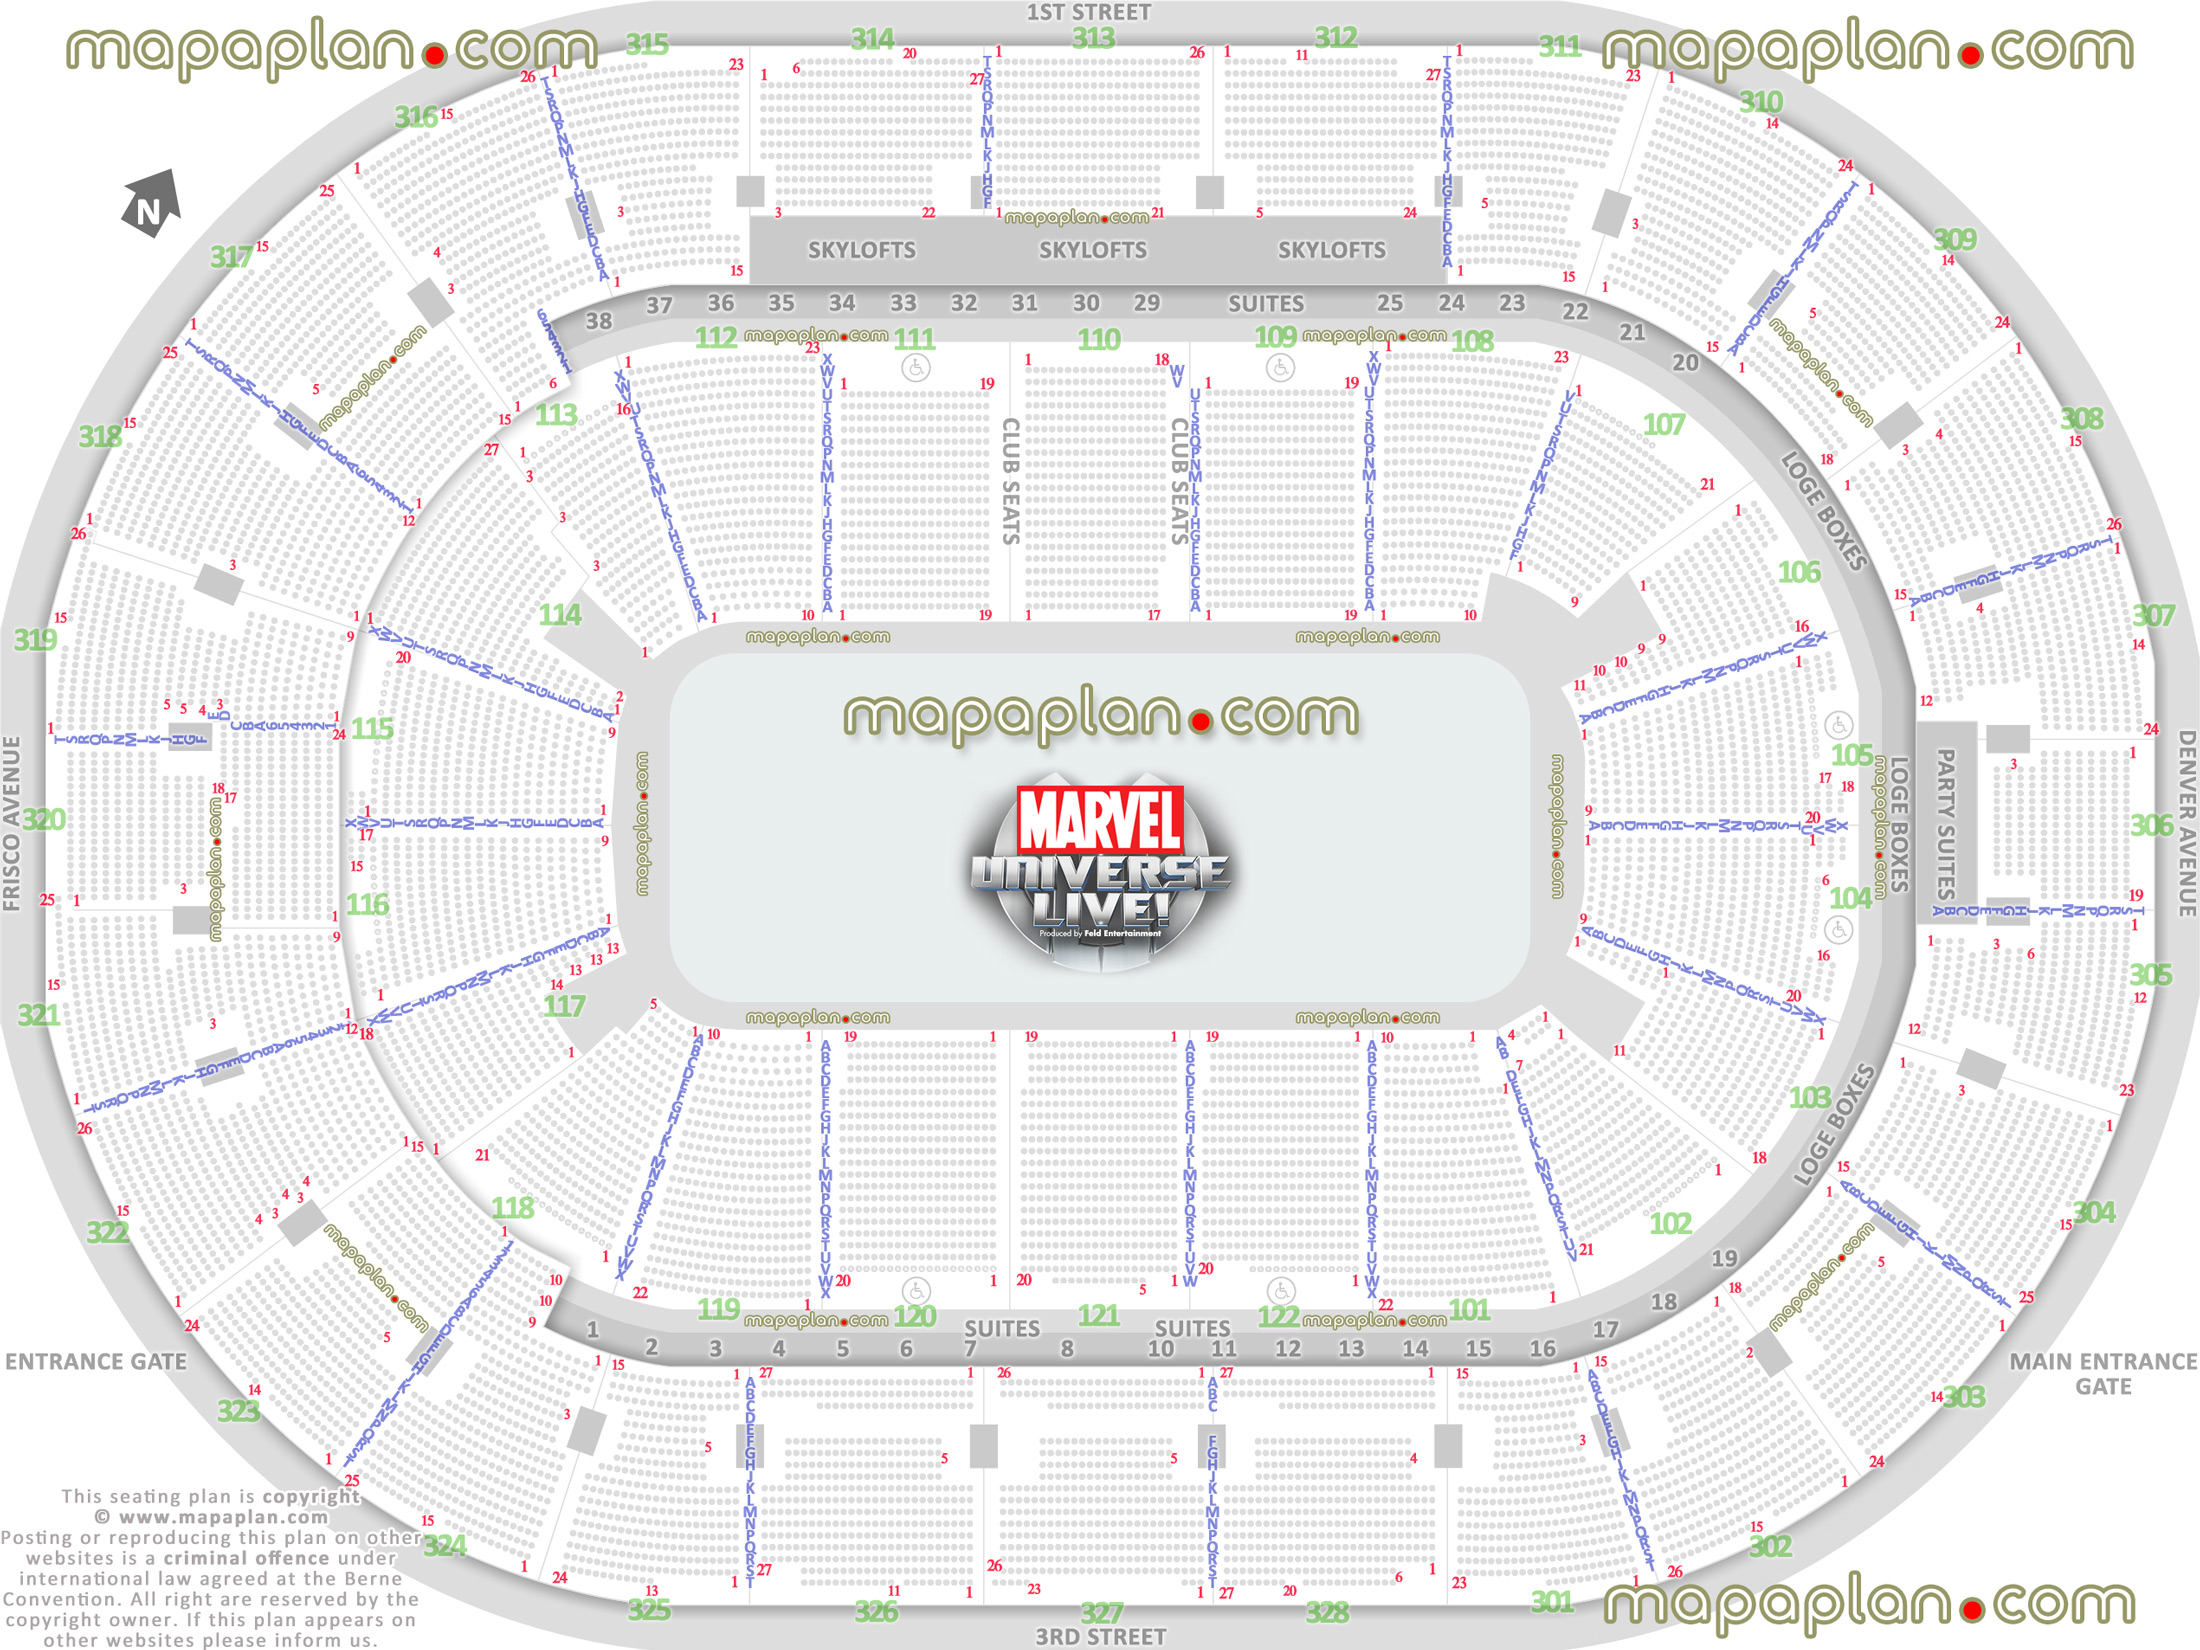 marvel universe live best seat selection arrangement virtual interactive review image diagram how many seats row detailed fully seated chart setup viewer standing room only sro area wheelchair disabled handicap accessible seats Tulsa BOK Center seating chart